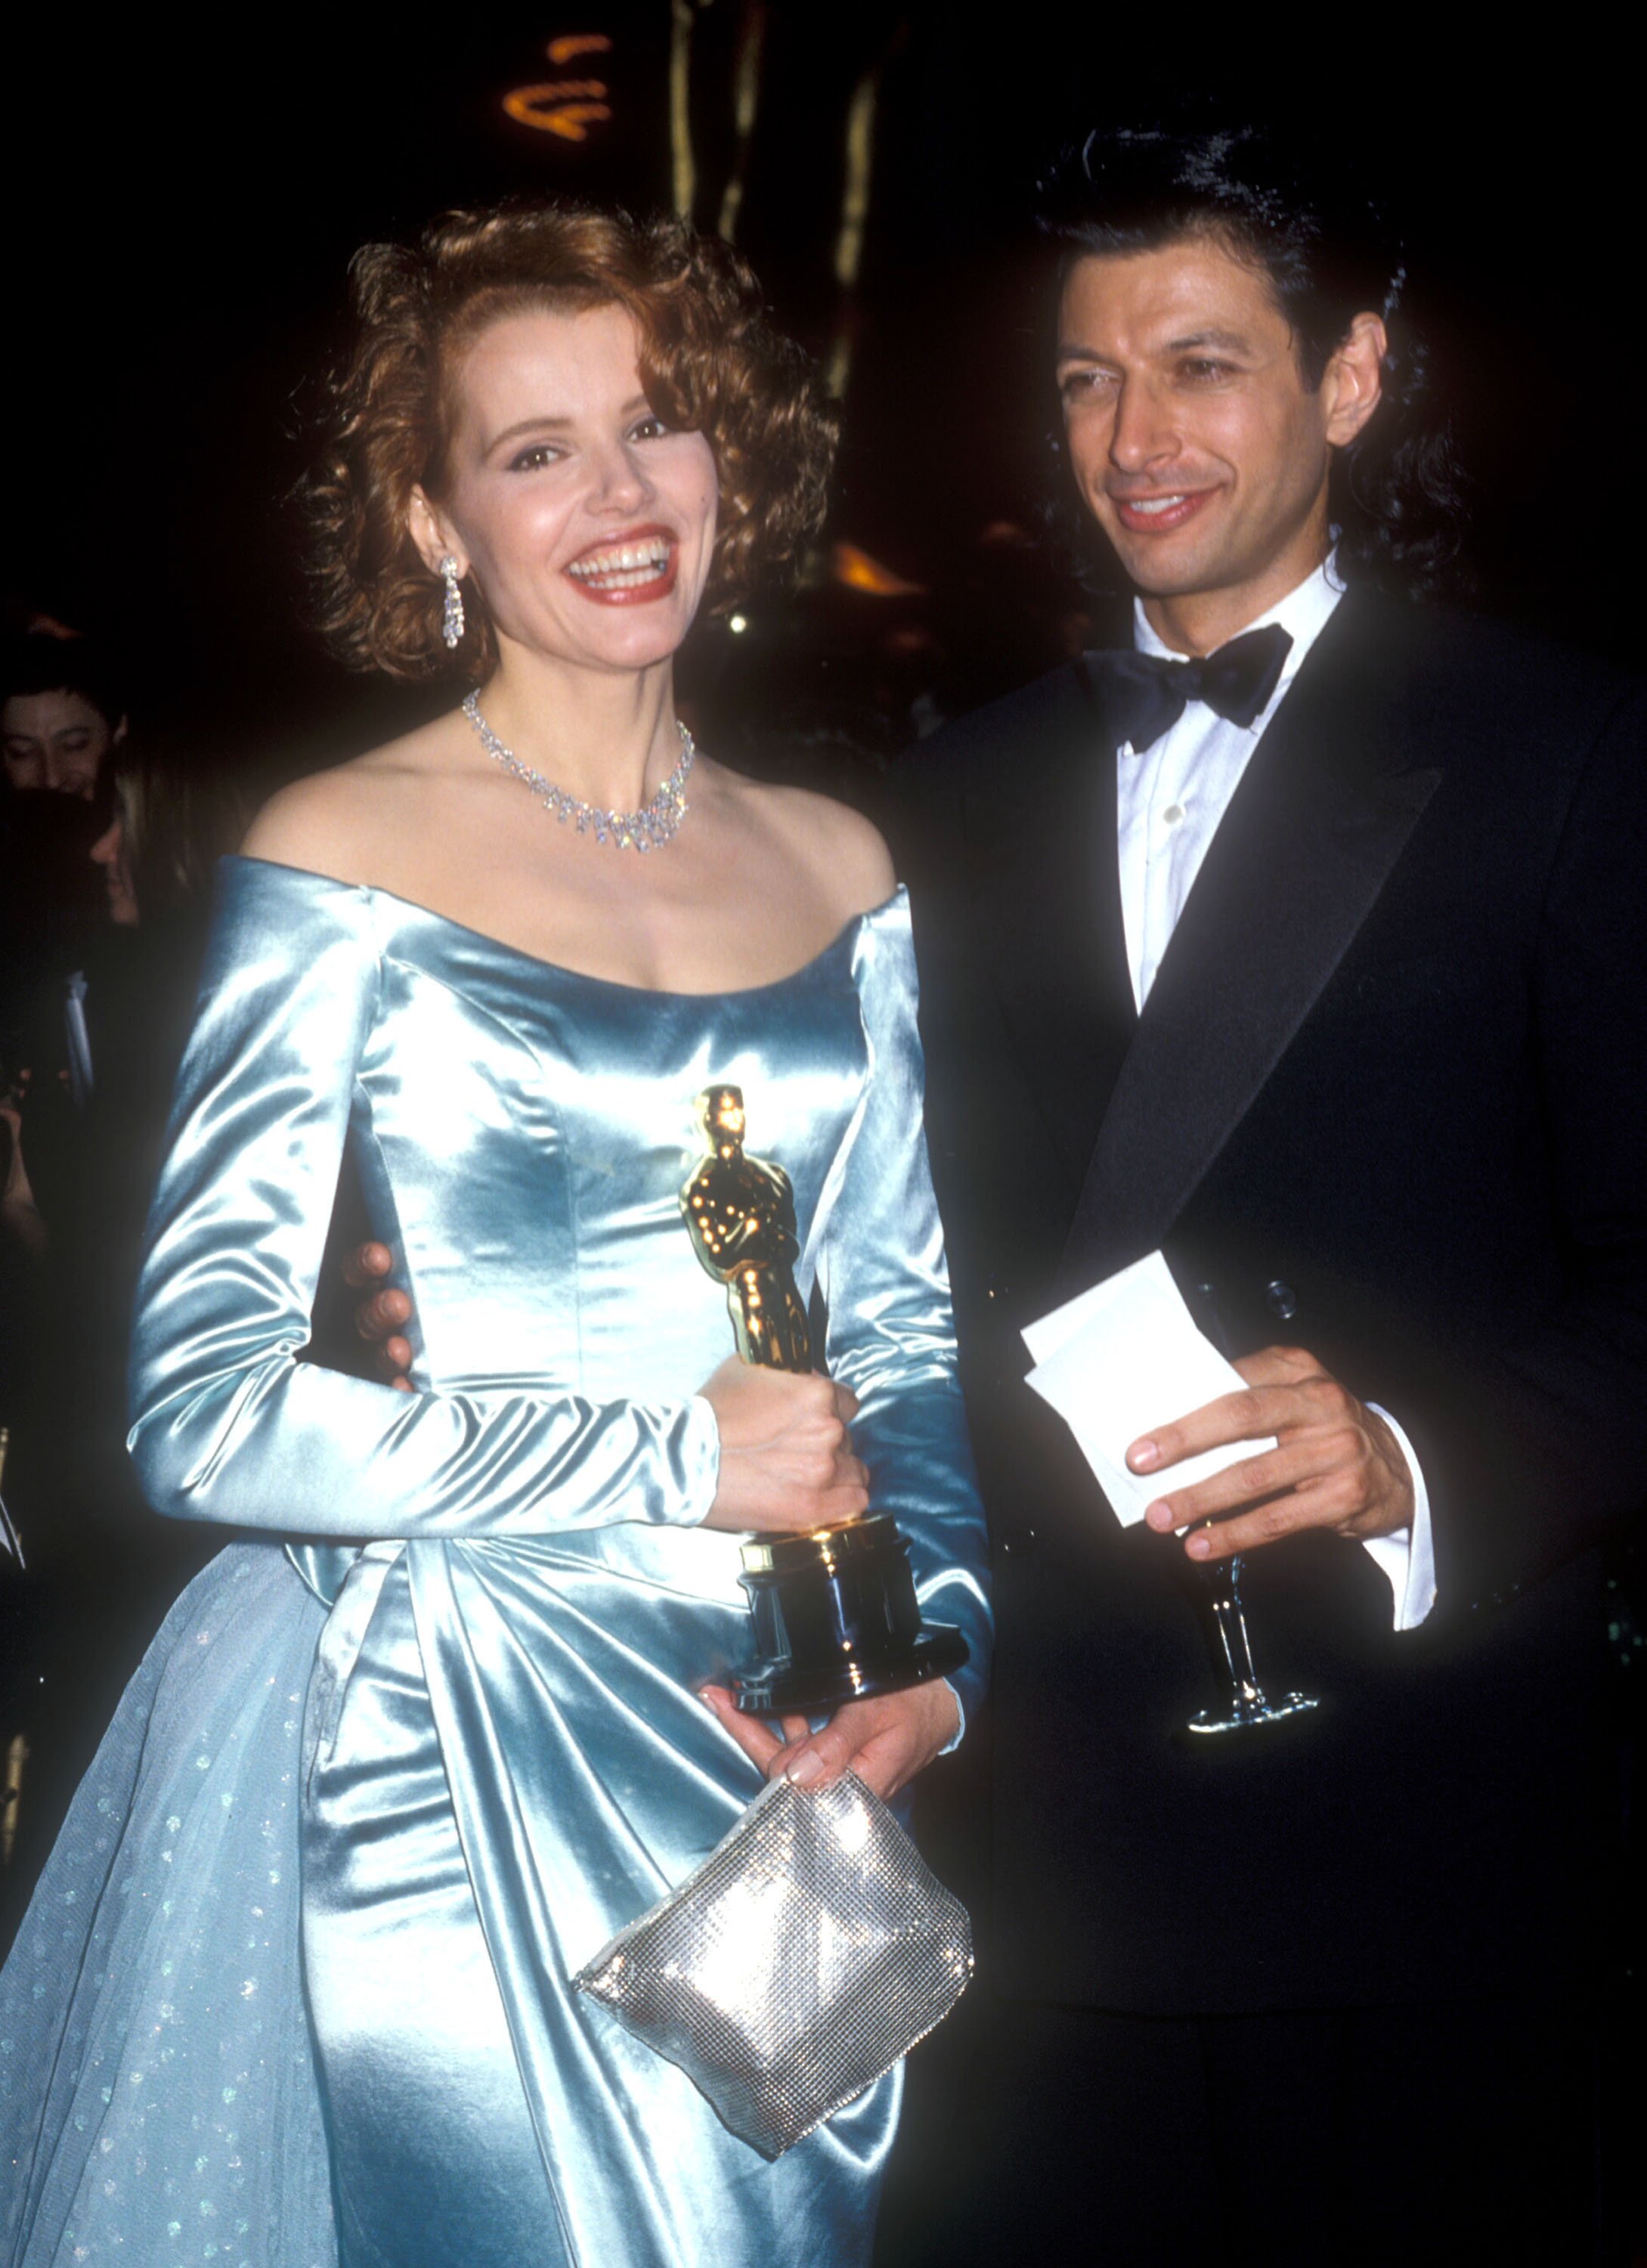 Geena Davis and Jeff Goldblum at the 61st Annual Academy Awards - Governor's Ball onMarch 29, 1989 | Source: Getty Images